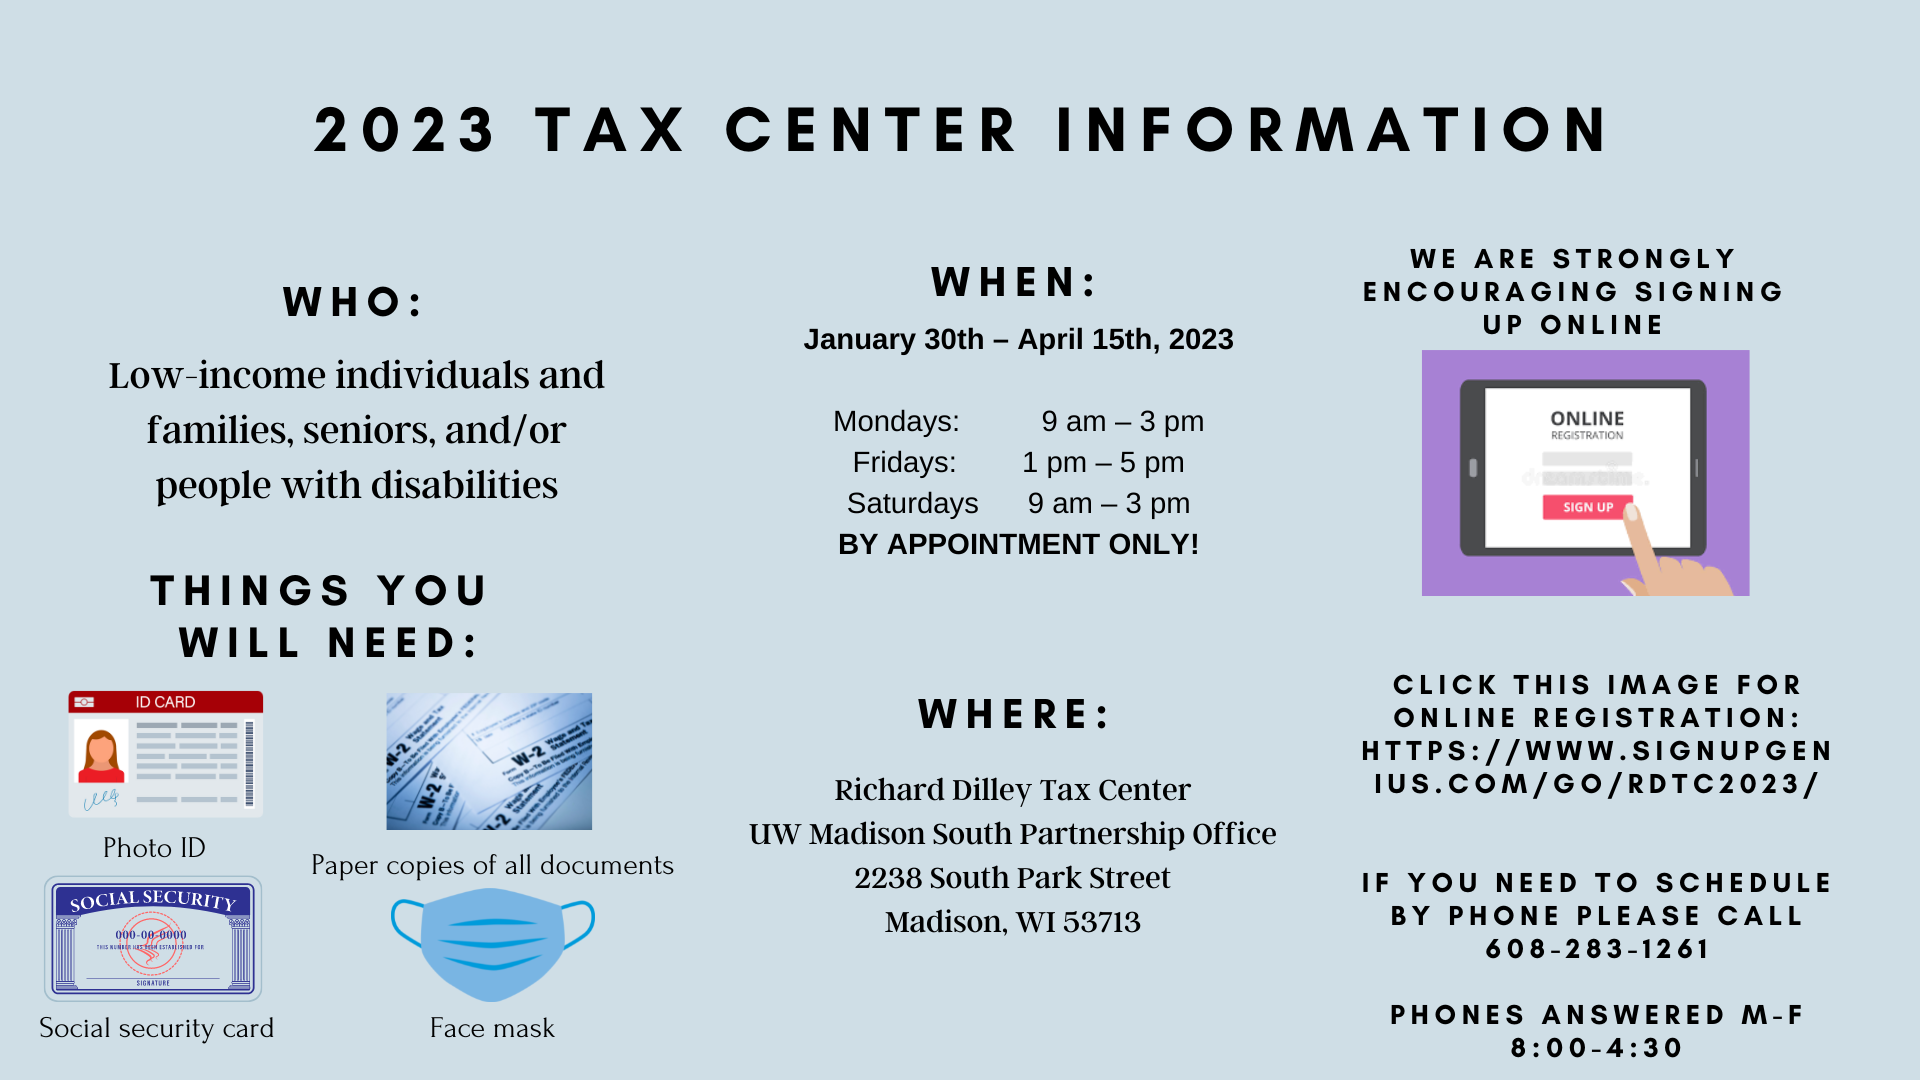 Information needed for the tax center